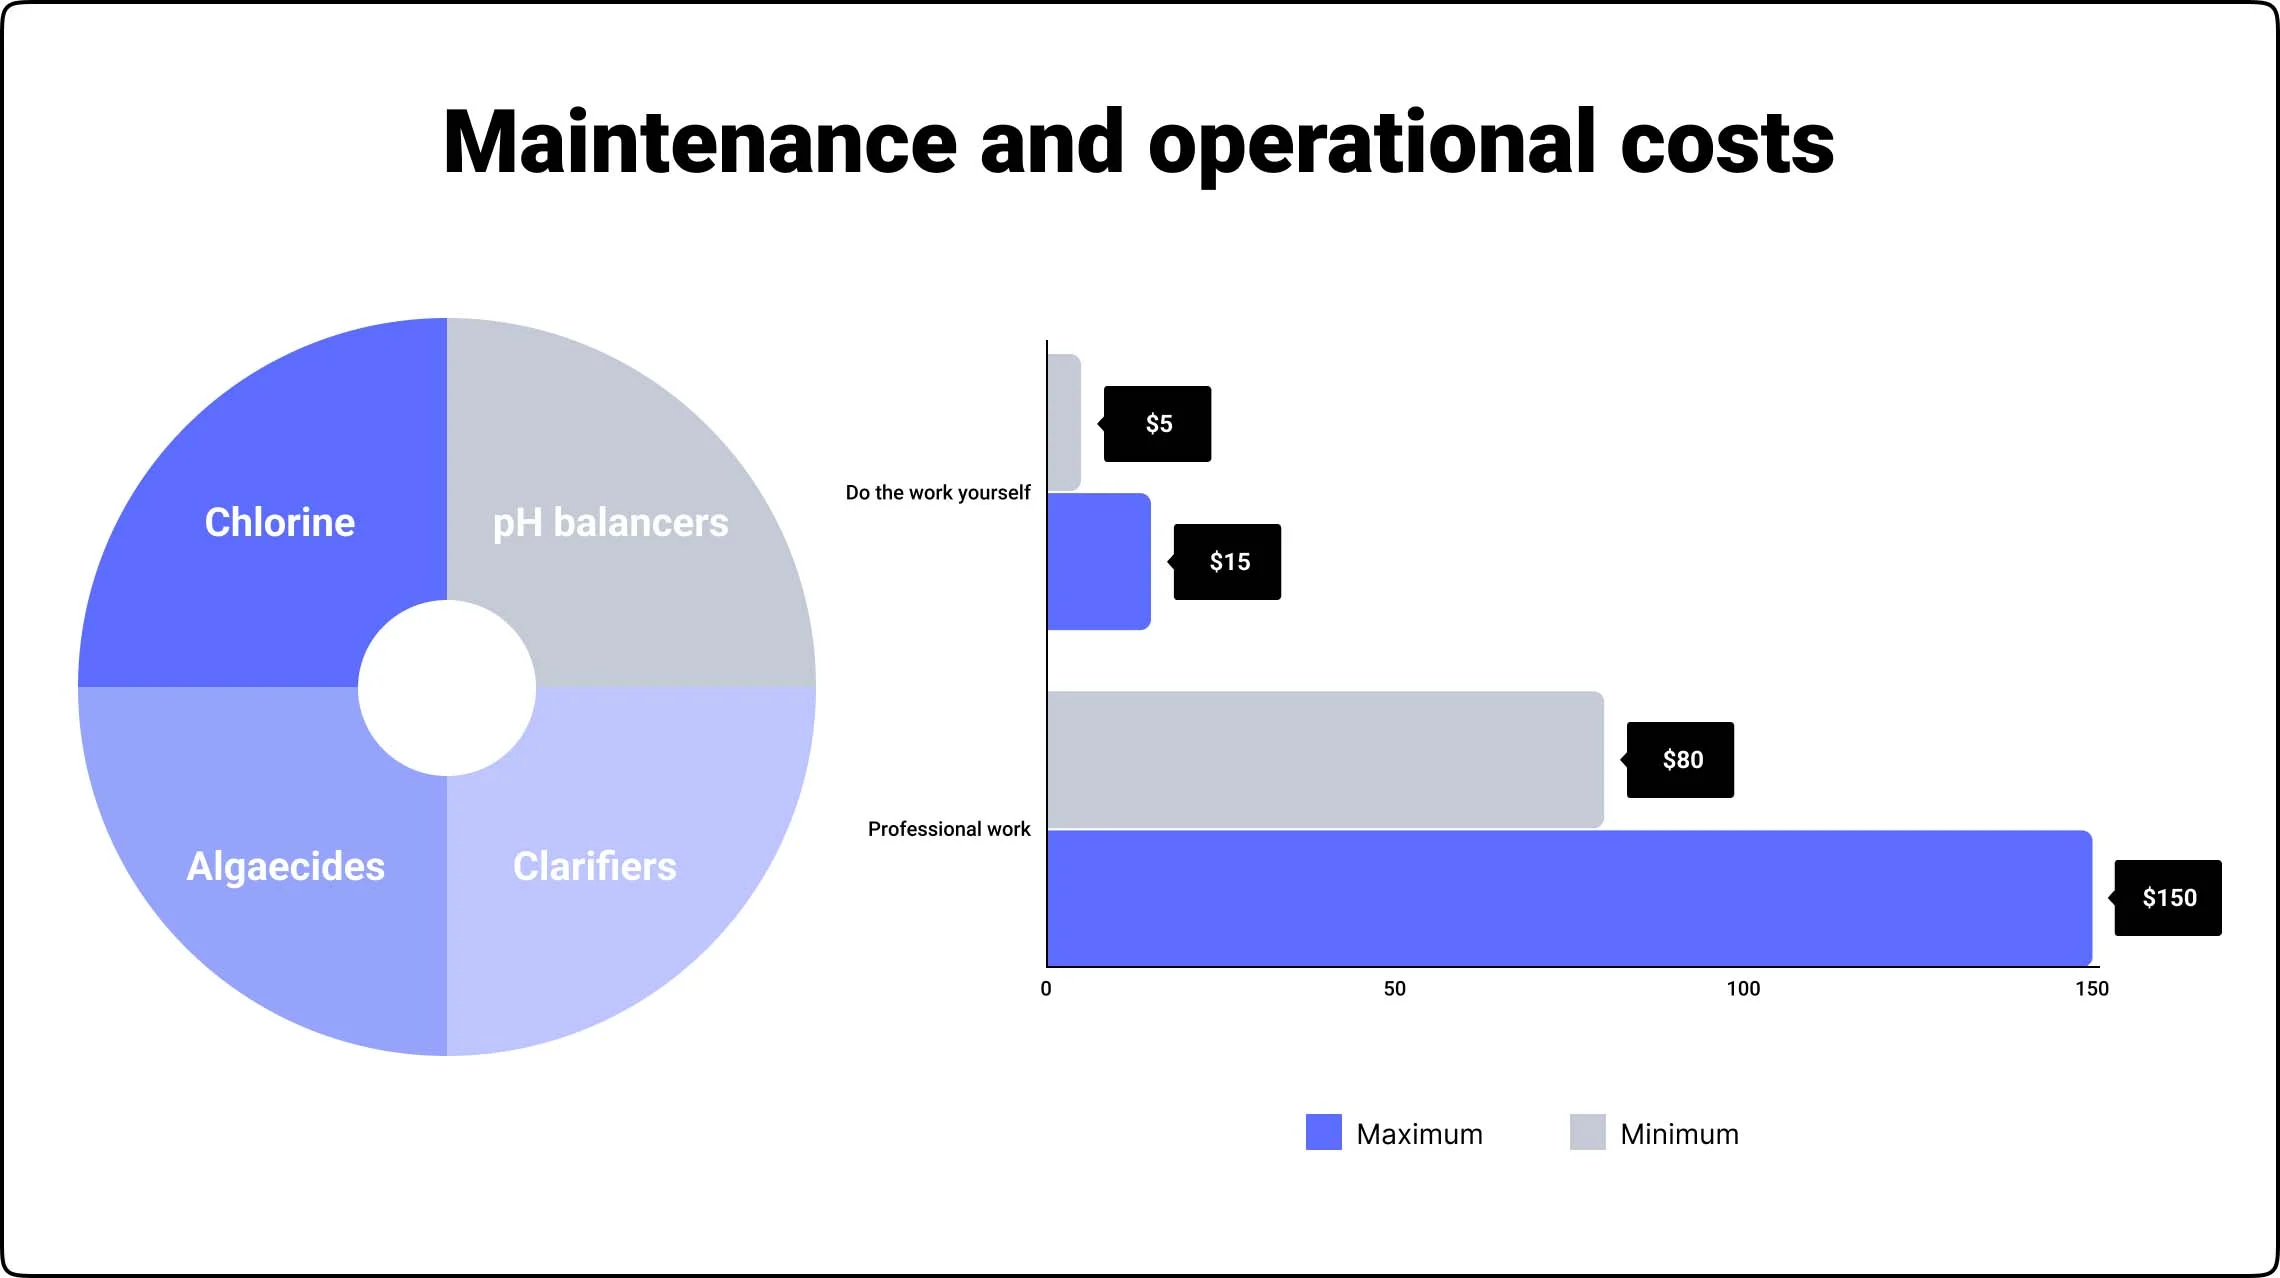 Maintenance and operational costs